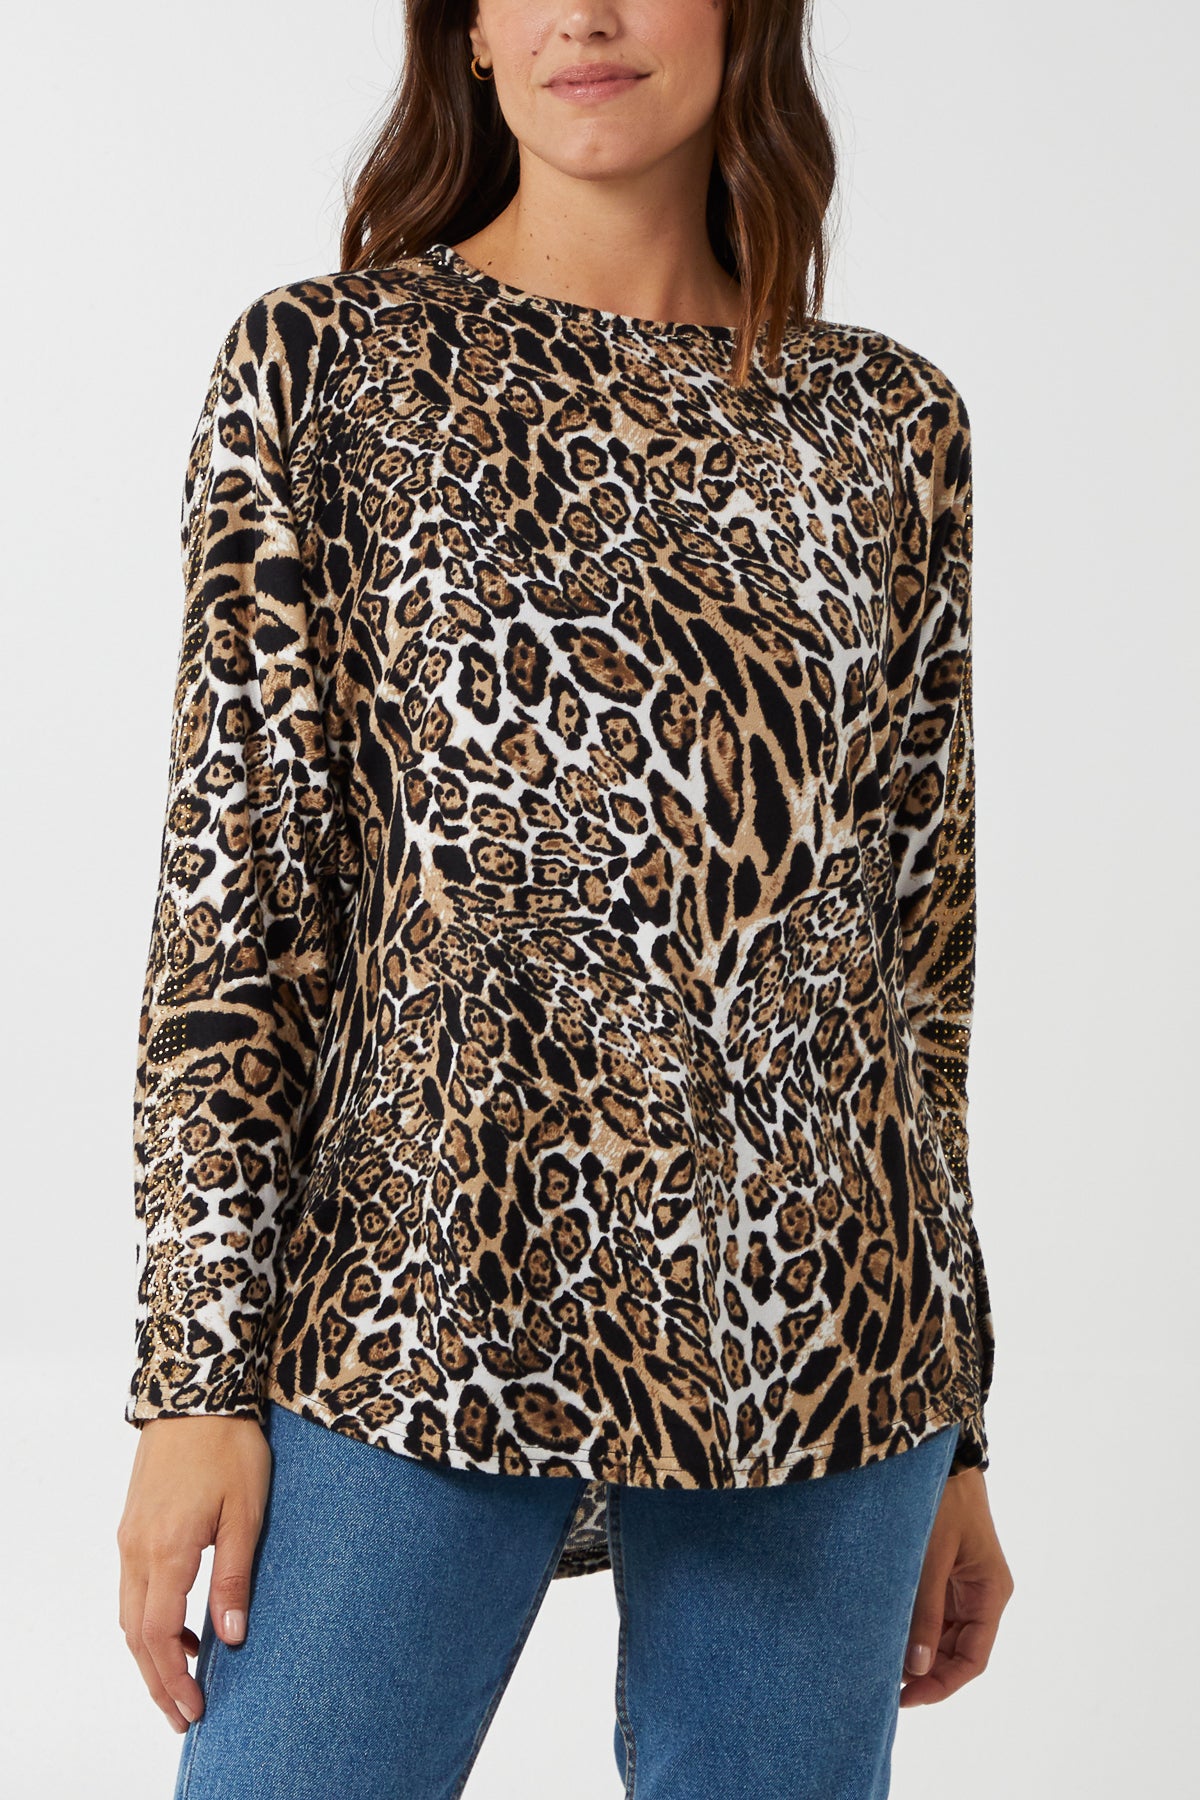 Leopard Print Crystal Detail Oversized Top